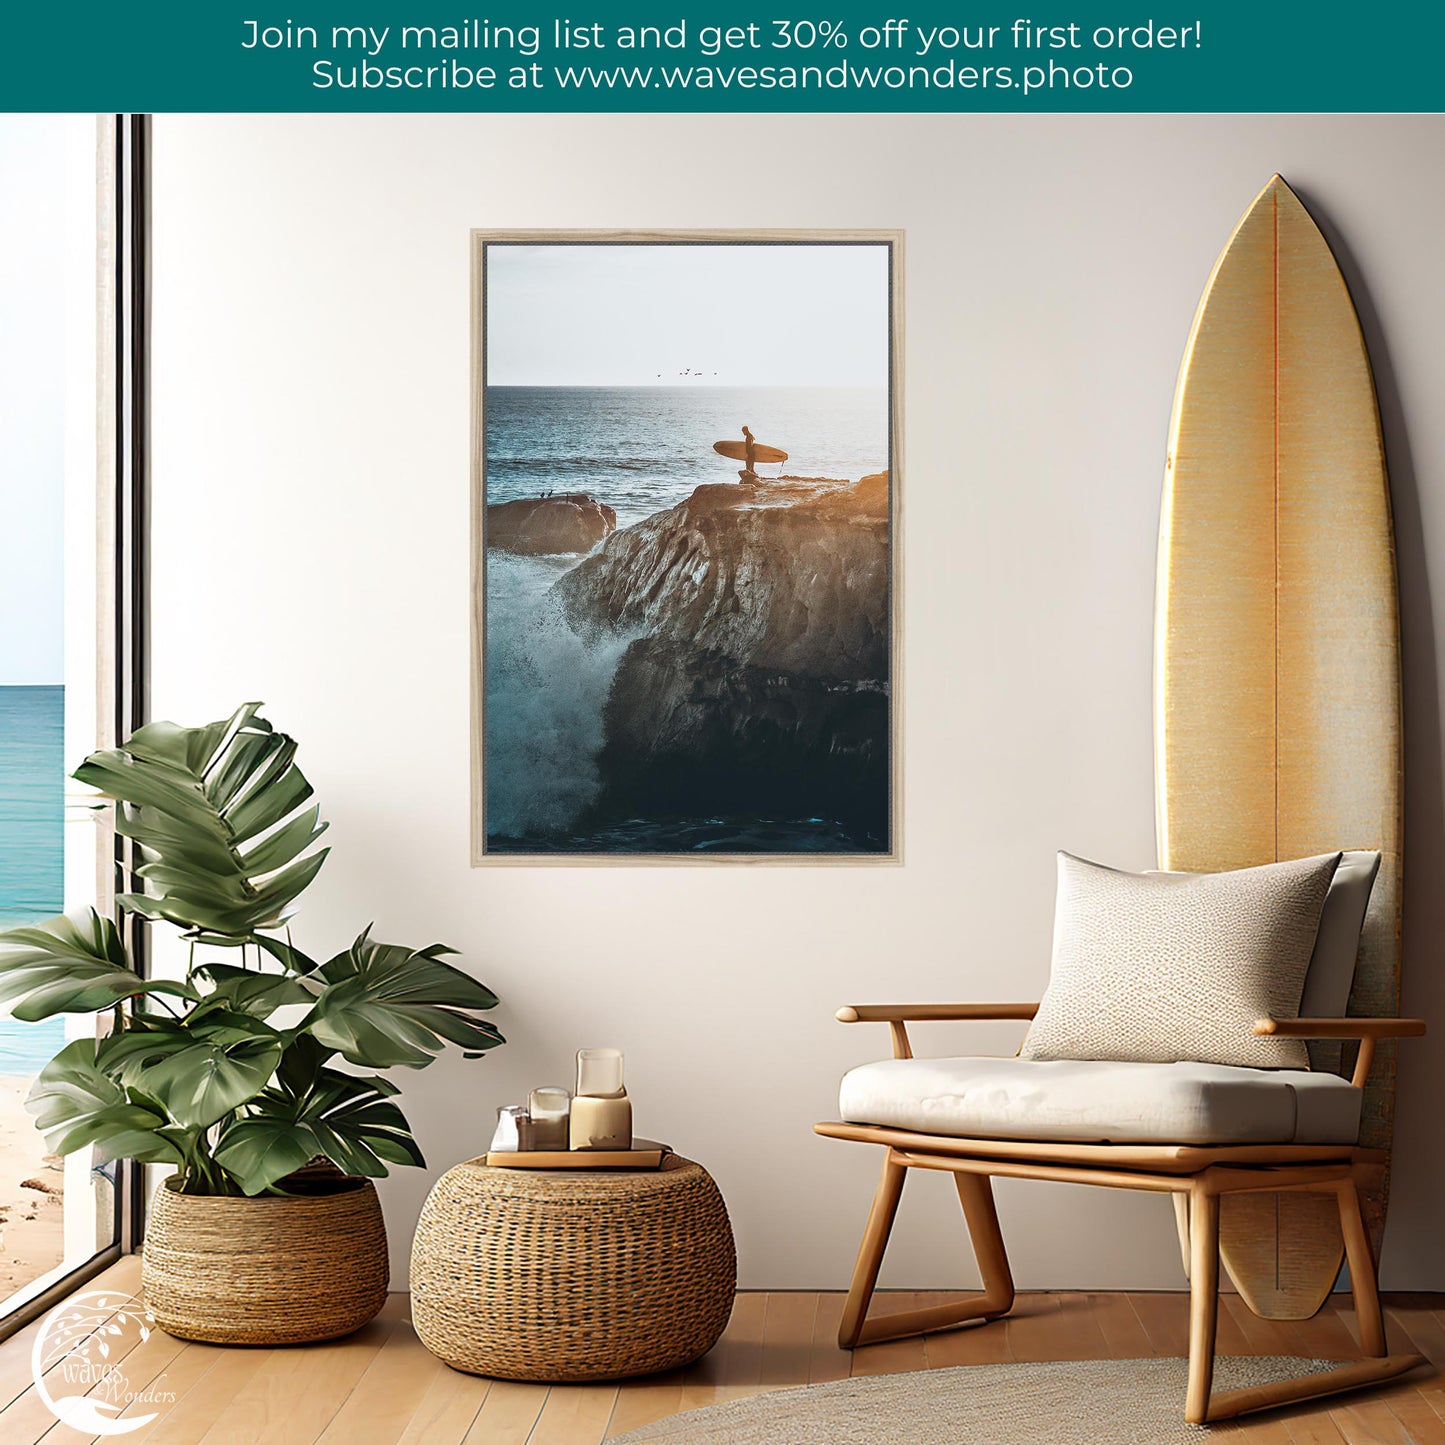 a living room with a surfboard on the wall